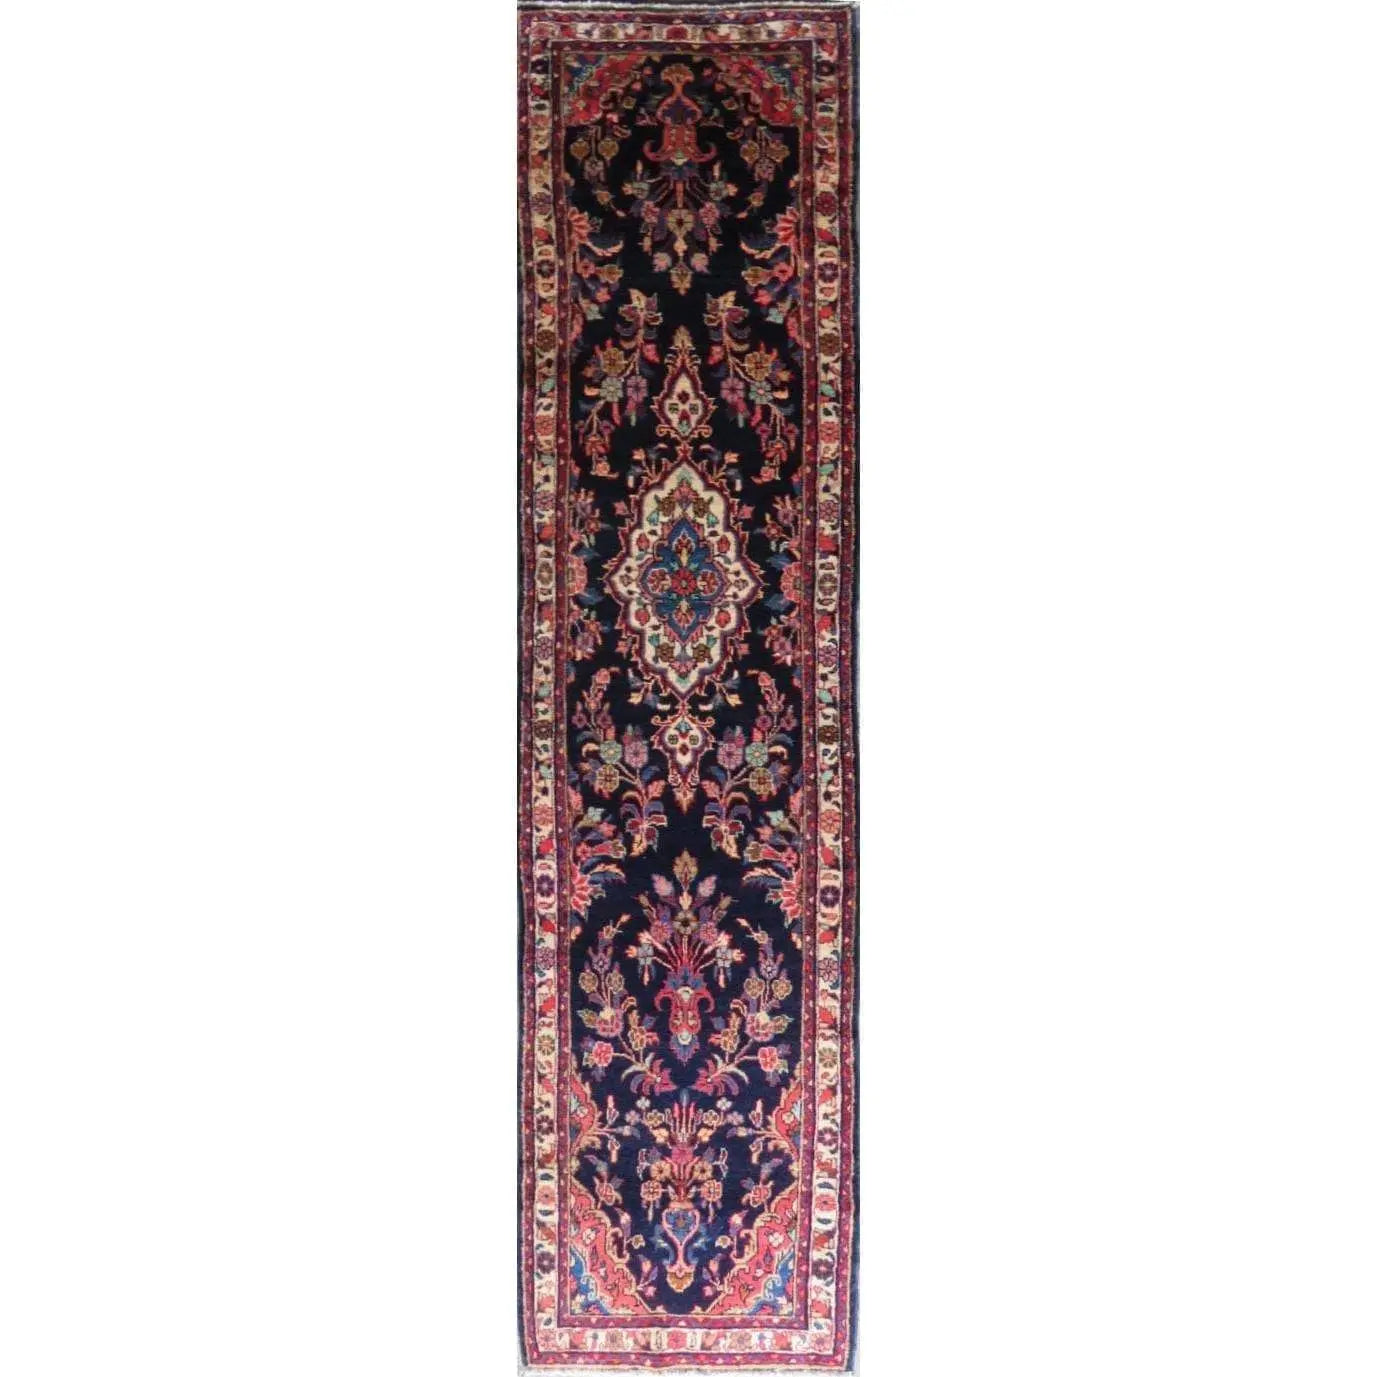 Hand-Knotted Persian Wool Rug _ Luxurious Vintage Design, 11'4" x 2'6", Artisan Crafted